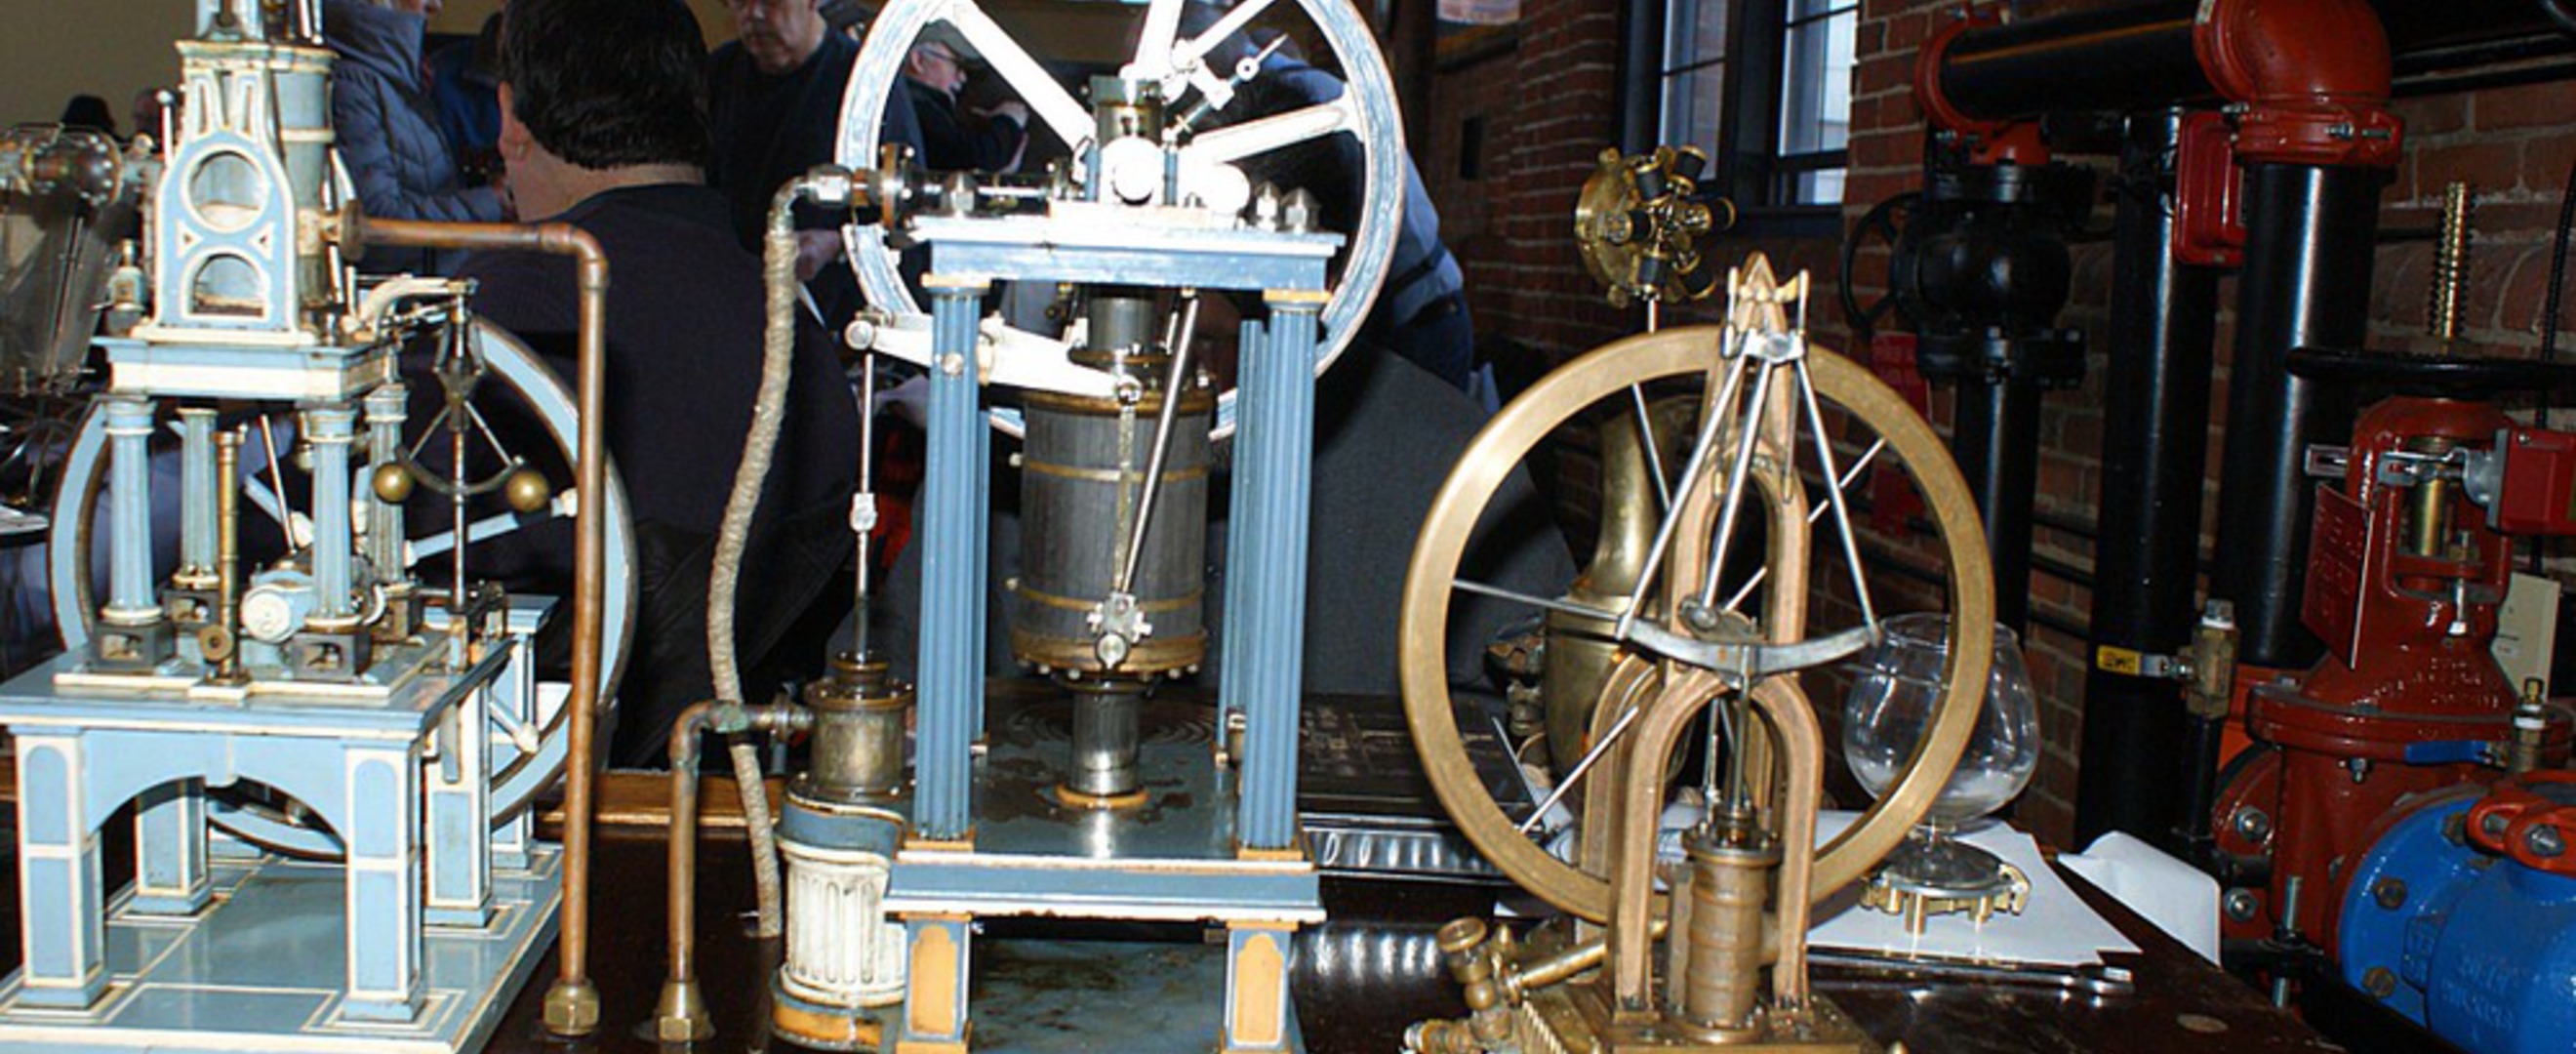 Member-built engines displayed at our annual exhibition